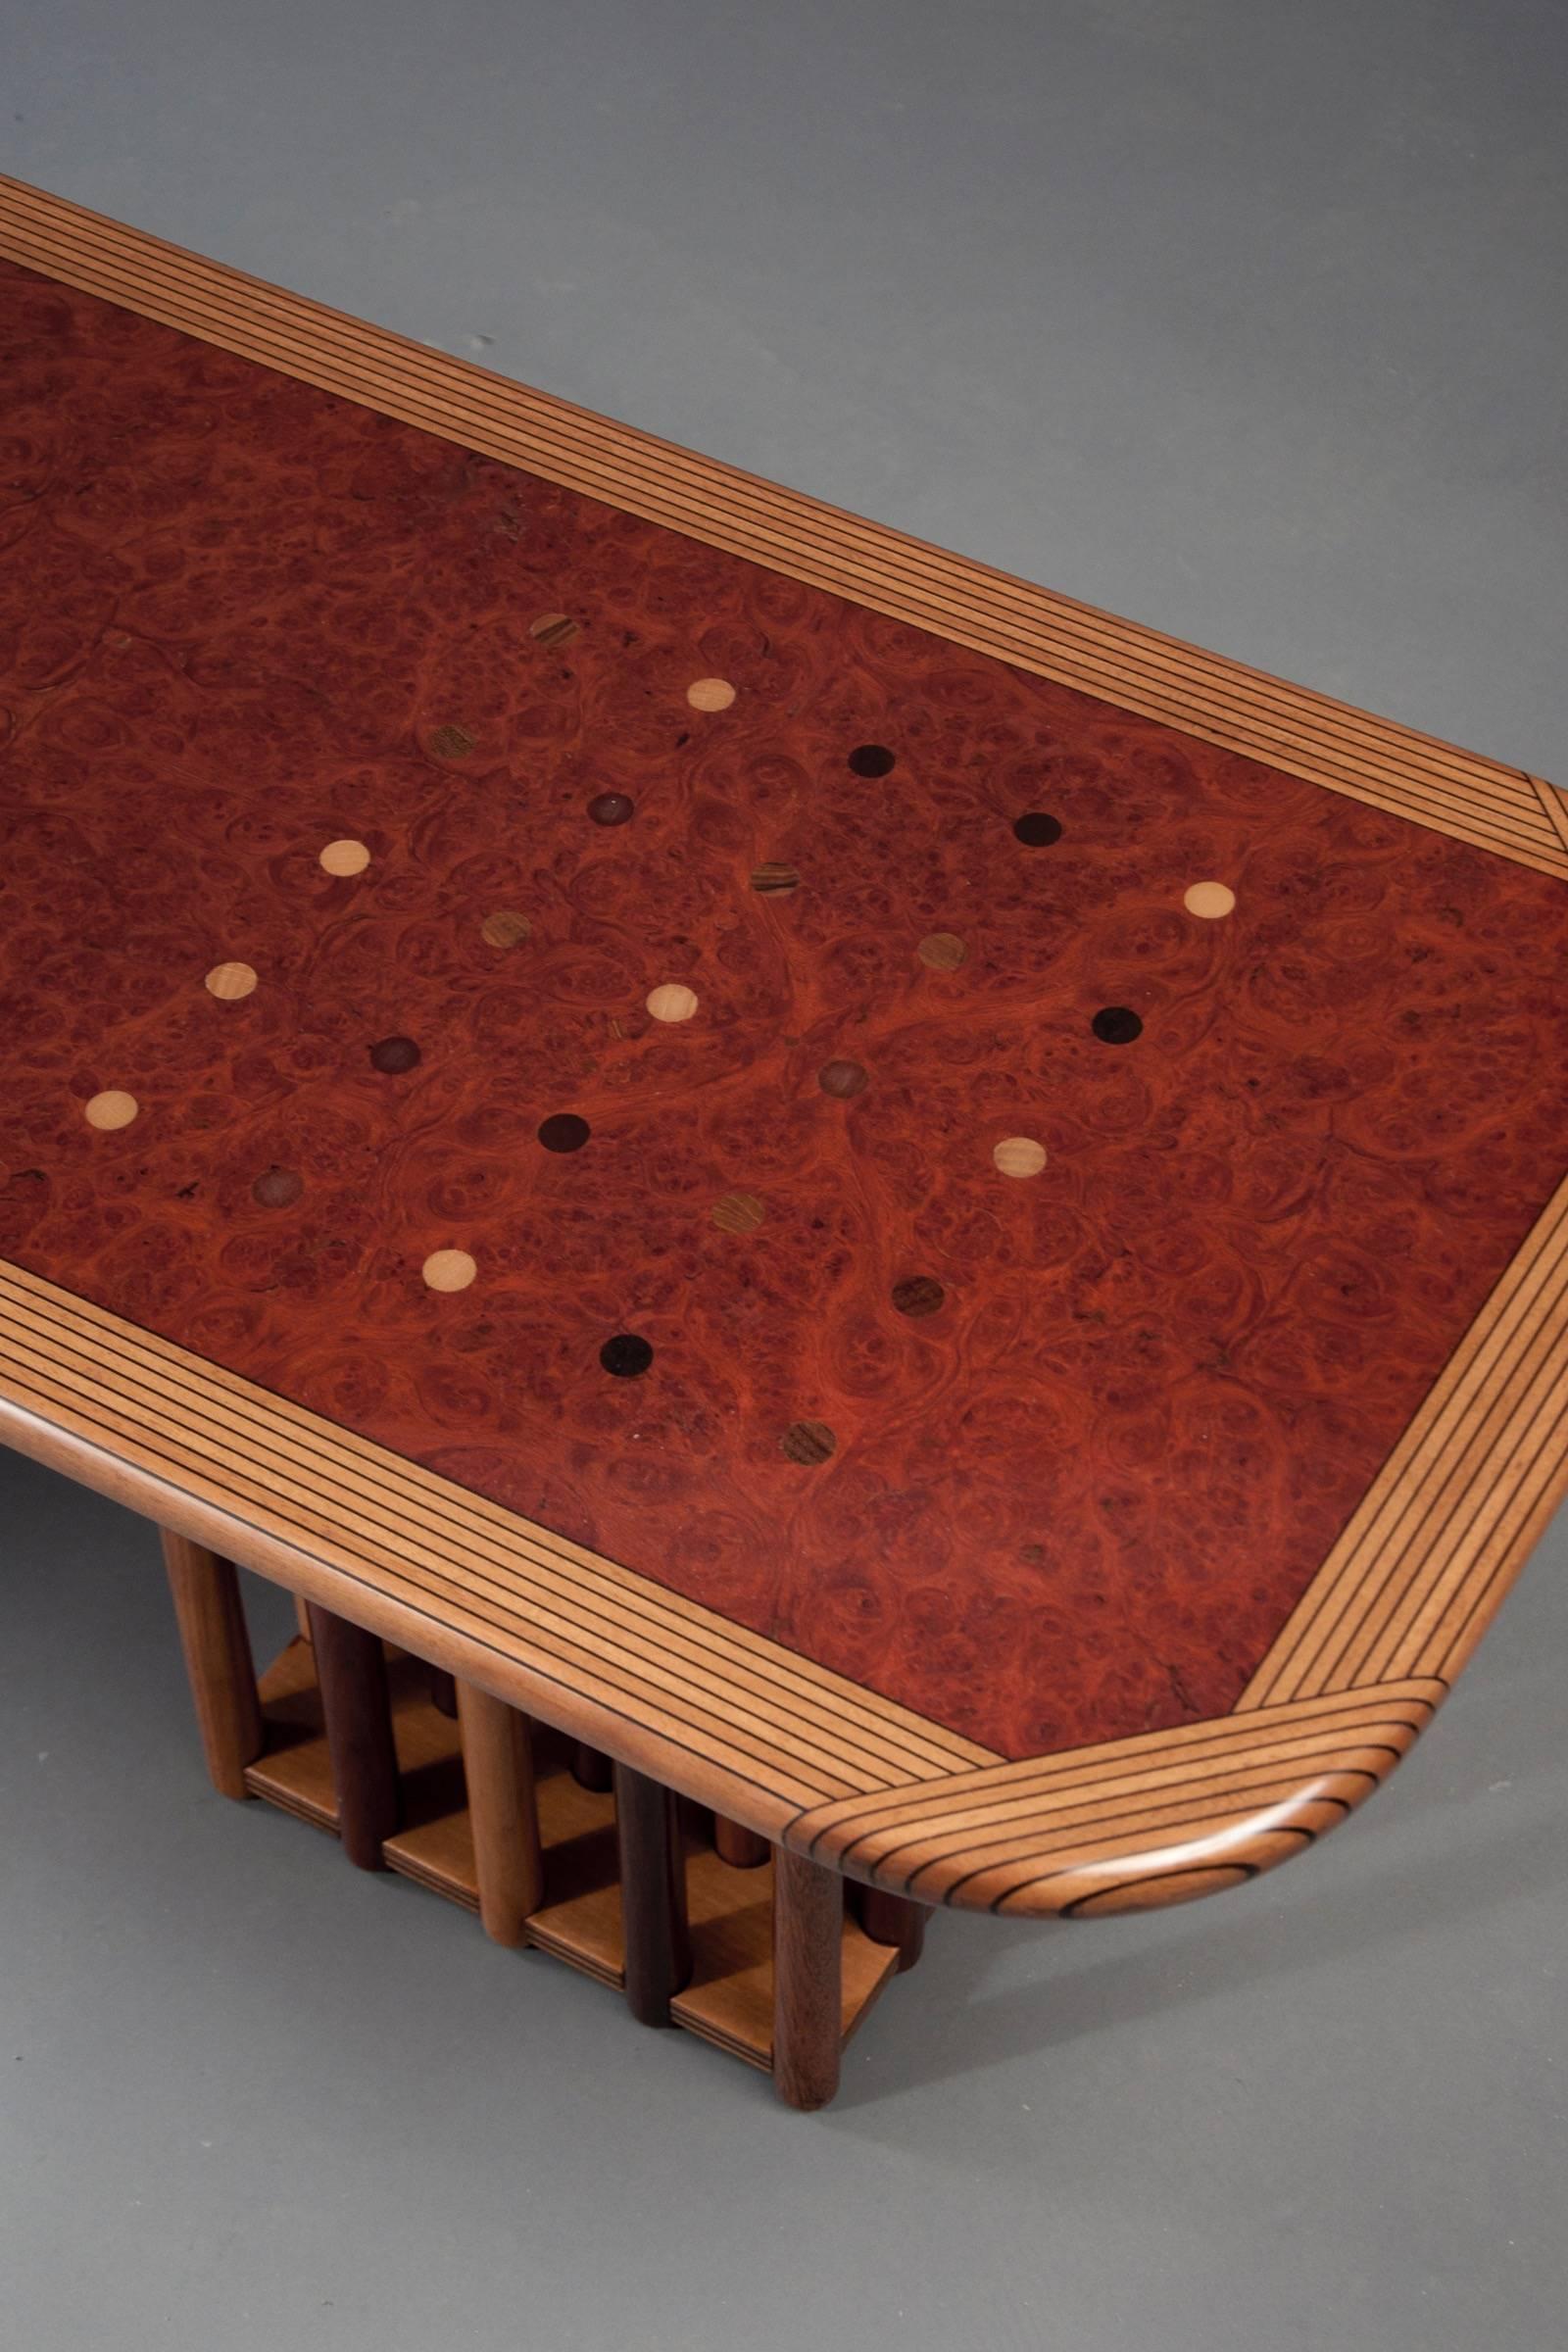 Walnut, burl walnut, rosewood and ebony rectangular table with a striated edge; raised on two supports composed of numerous dowels of exotic wood, from the Scarpas’ “Artona” series.

OUR REFERENCE N8108